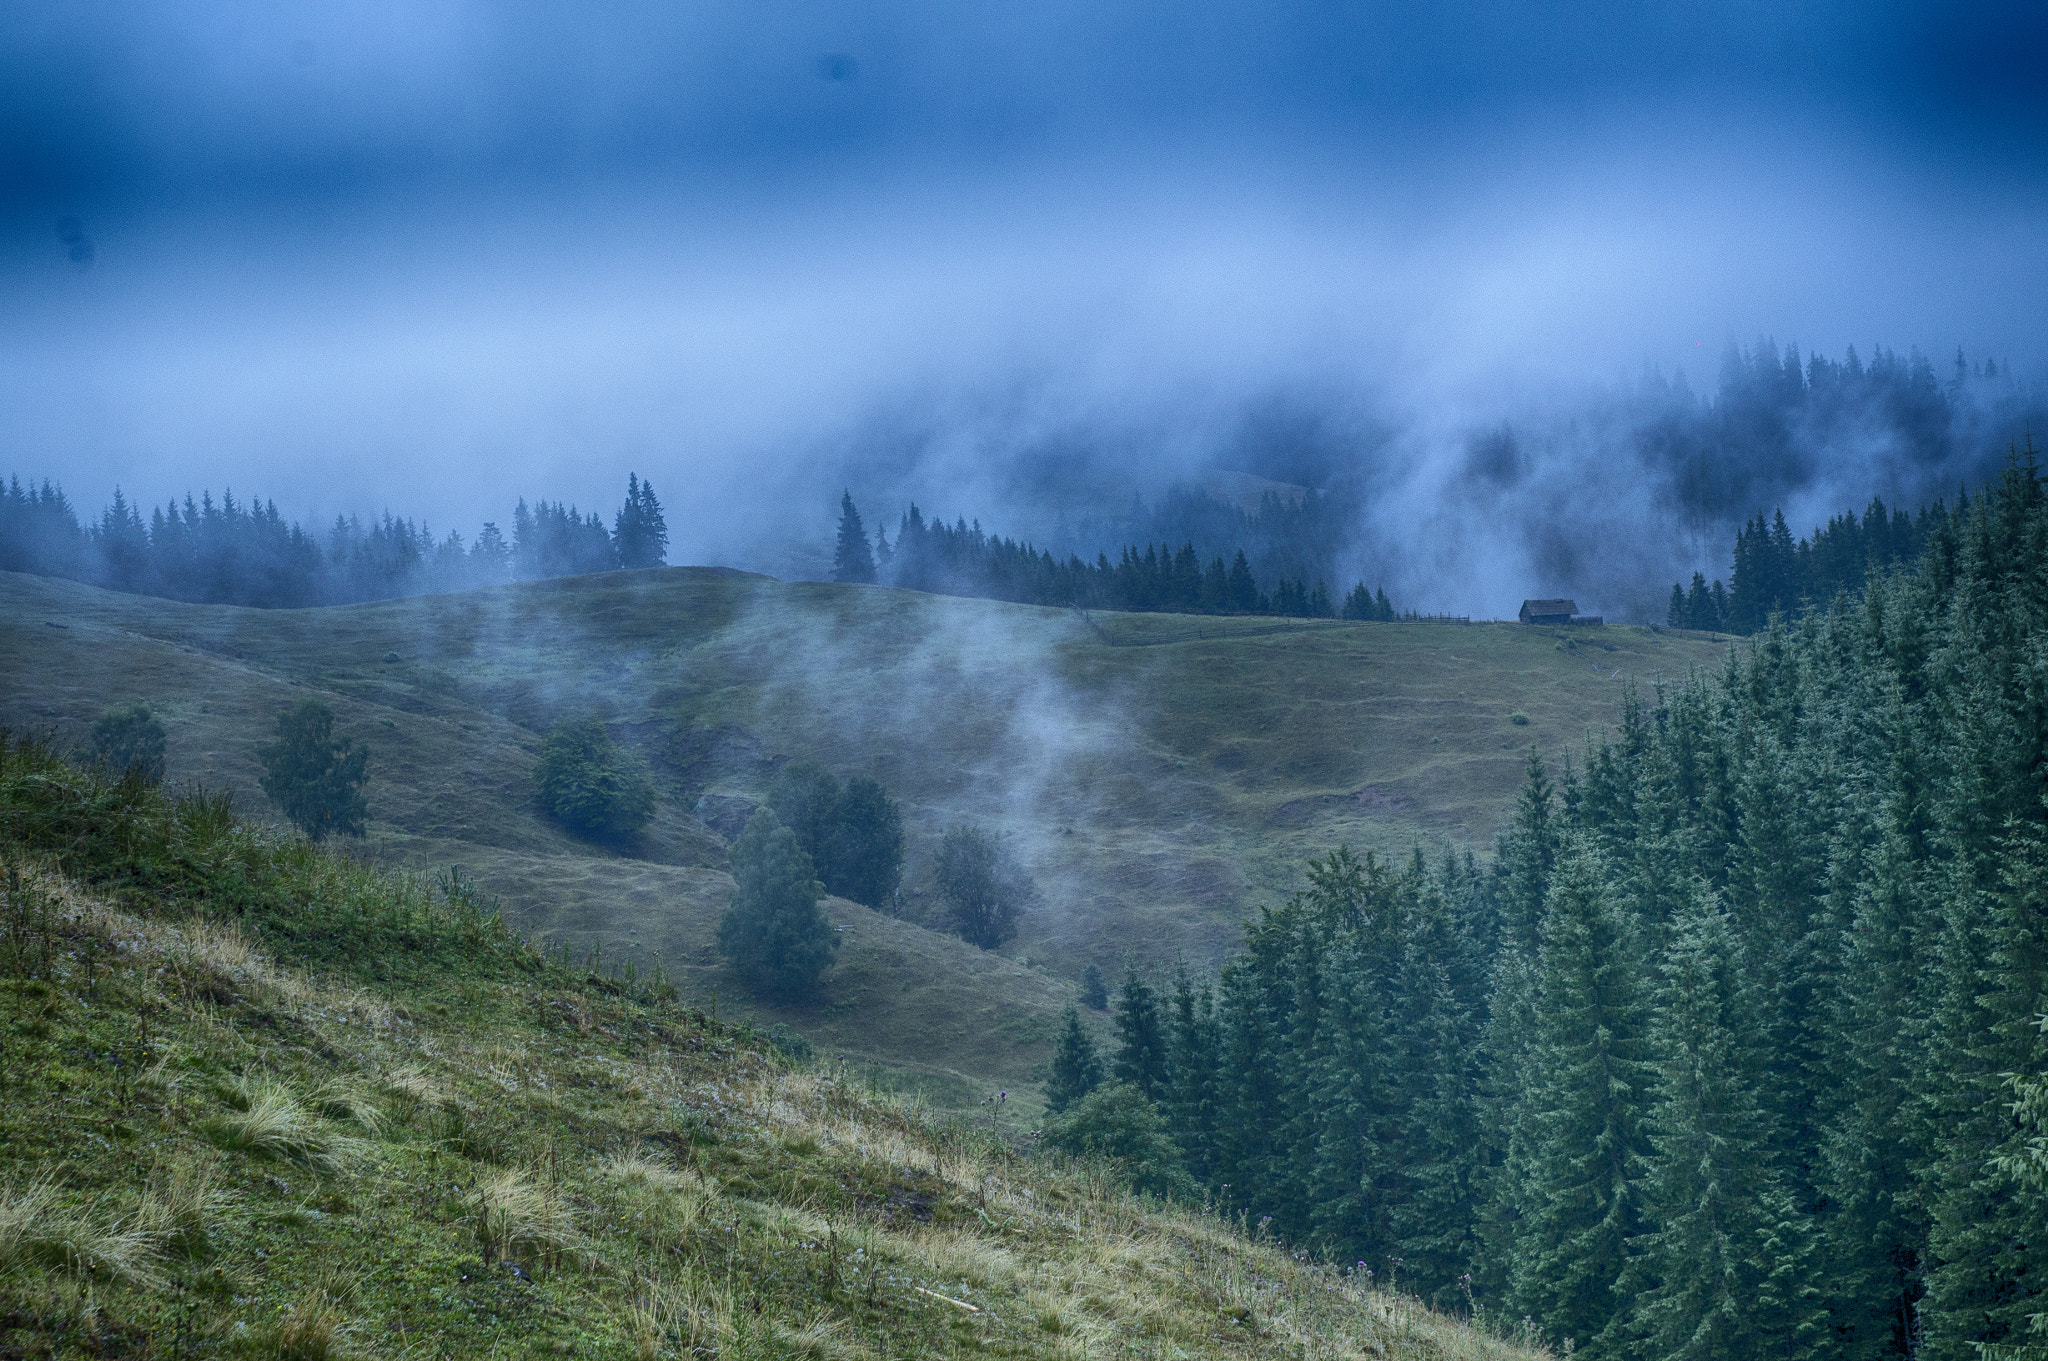 Sony SLT-A57 + Tamron SP 24-70mm F2.8 Di VC USD sample photo. My misty mornings on the mountains part 2 photography